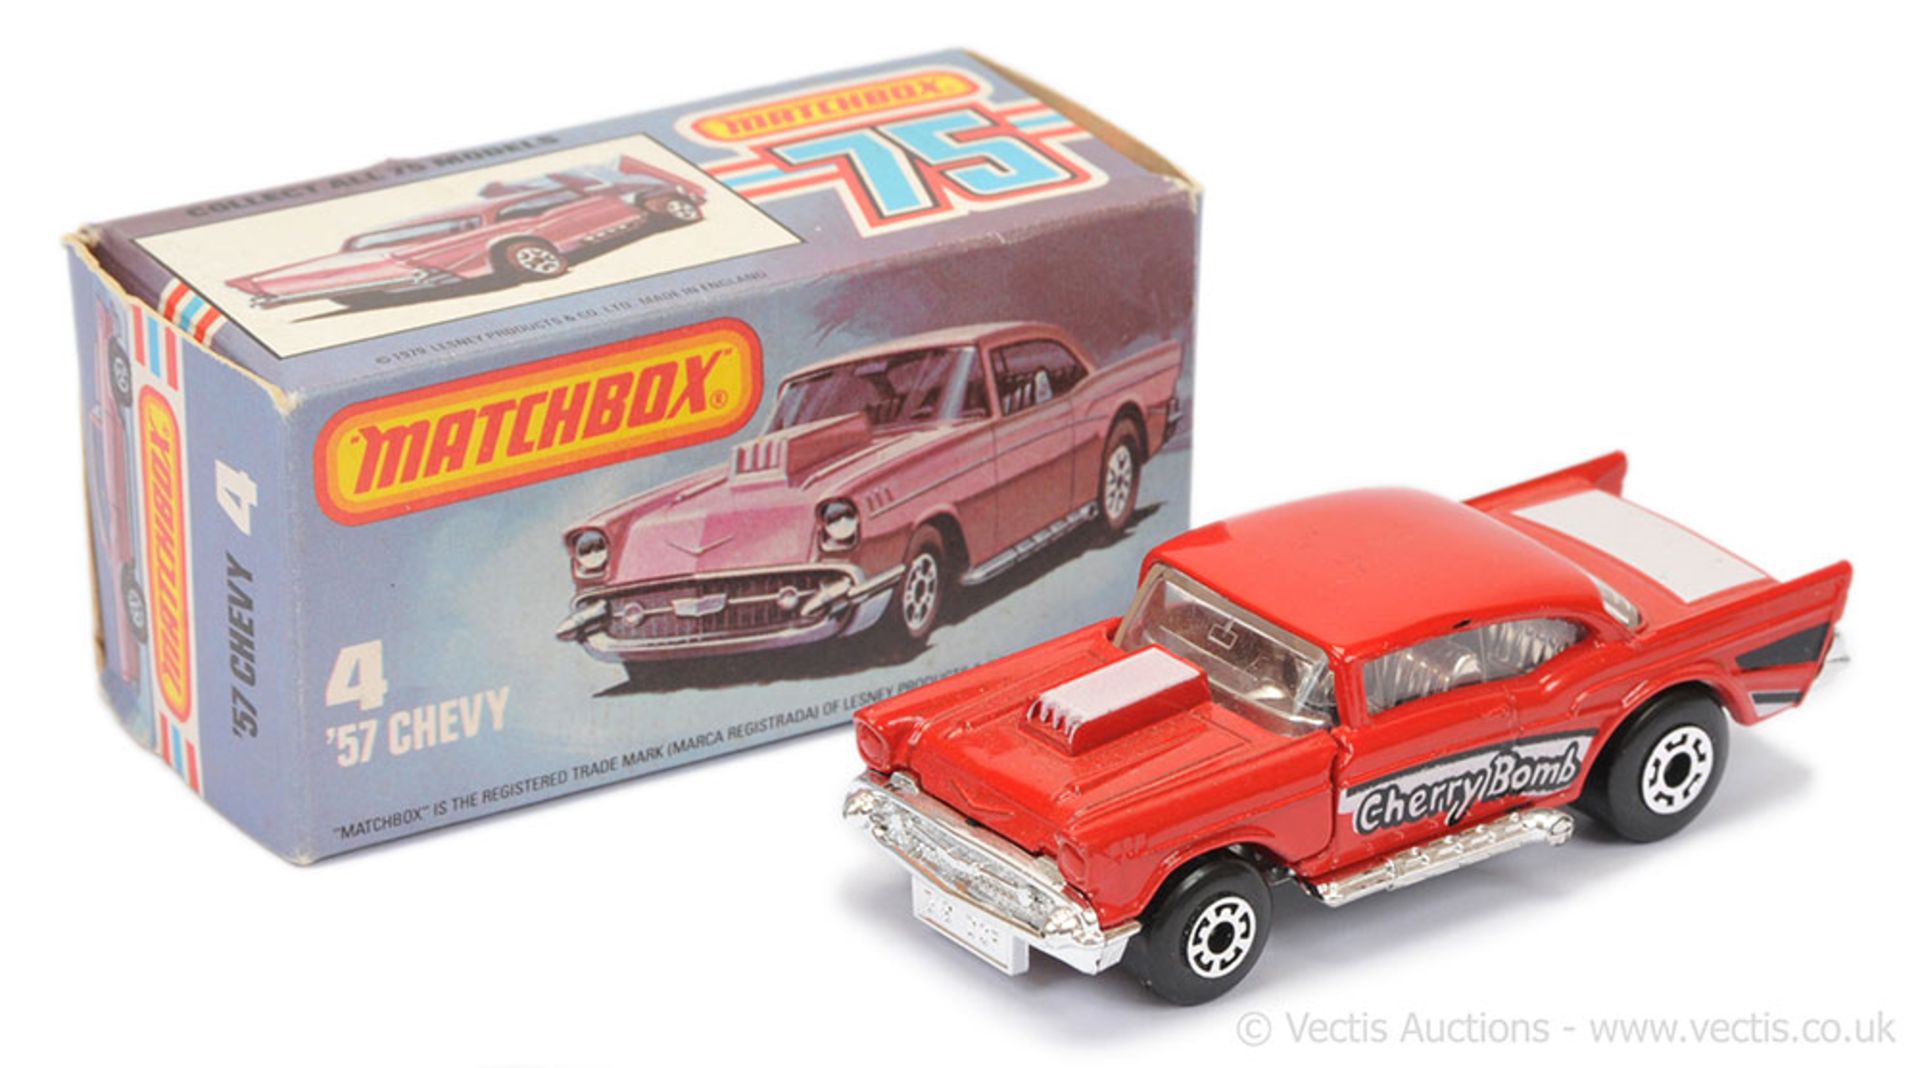 Matchbox Superfast 4d '57 Chevy - red body with